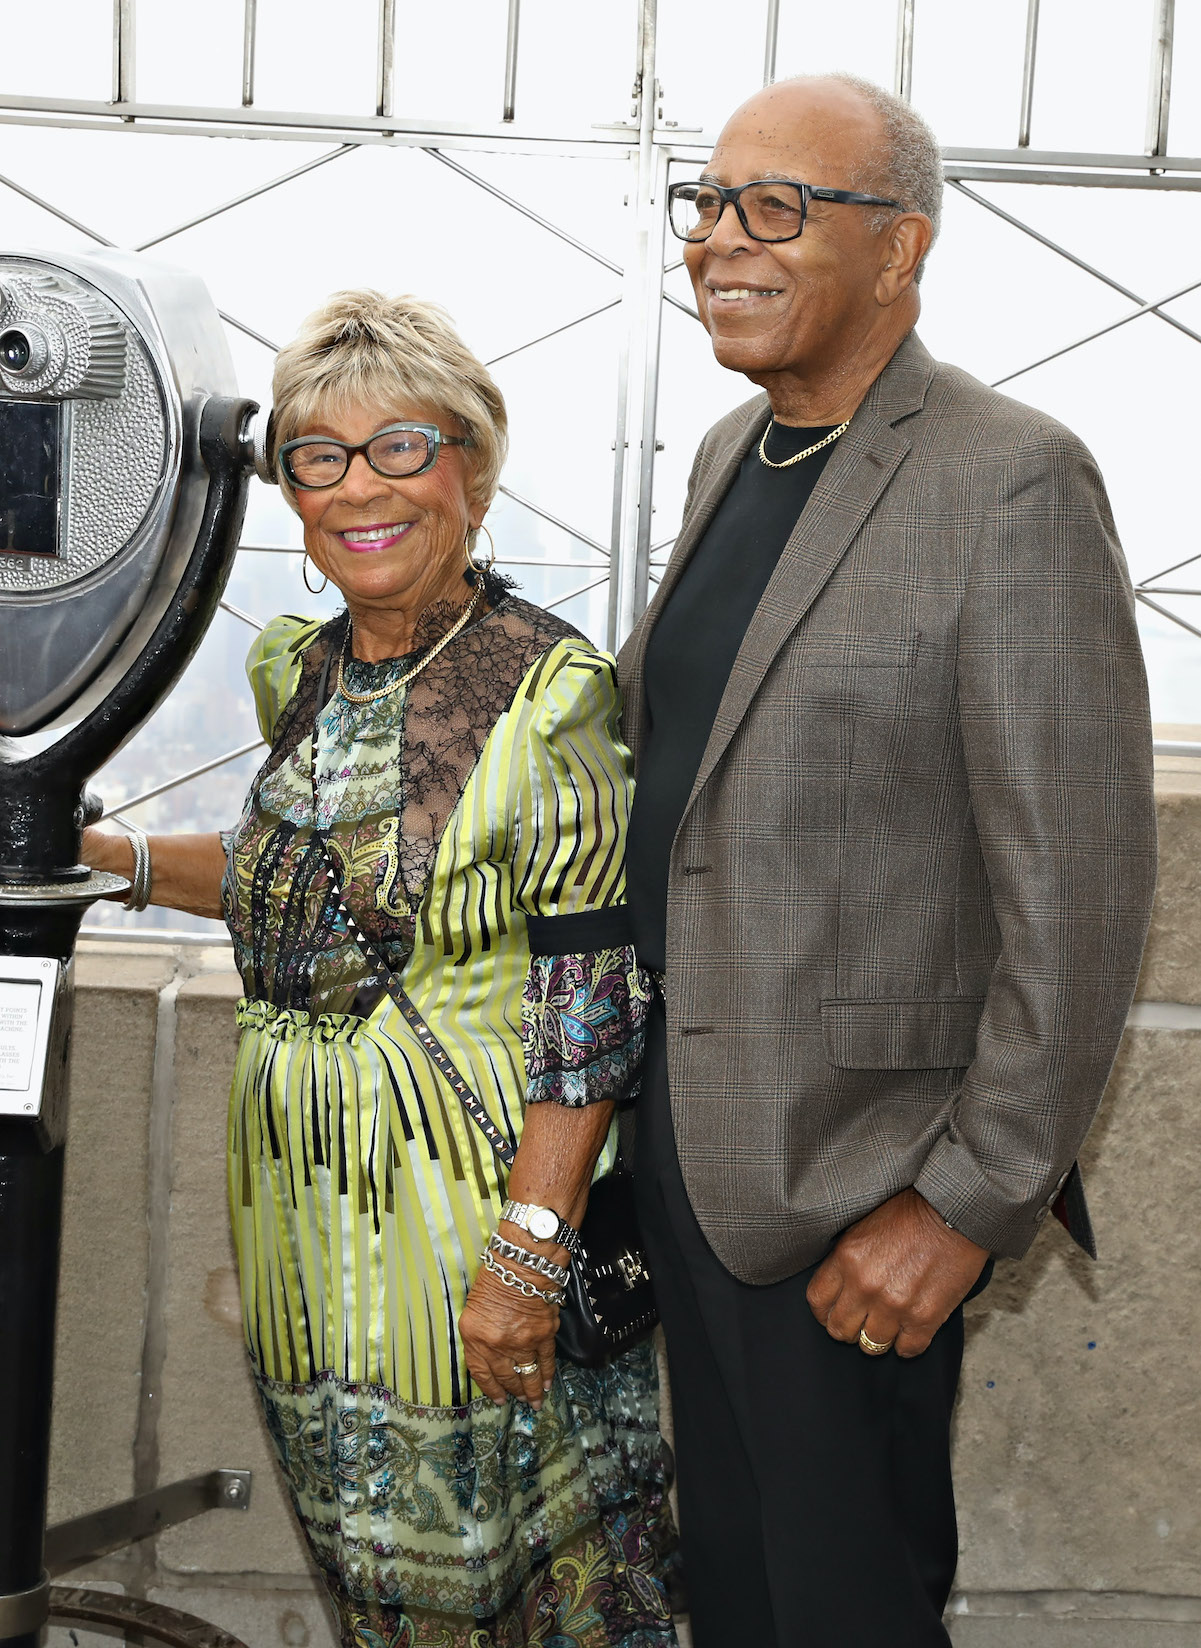 Wendy Williams' parents, Shirley and Tom Williams